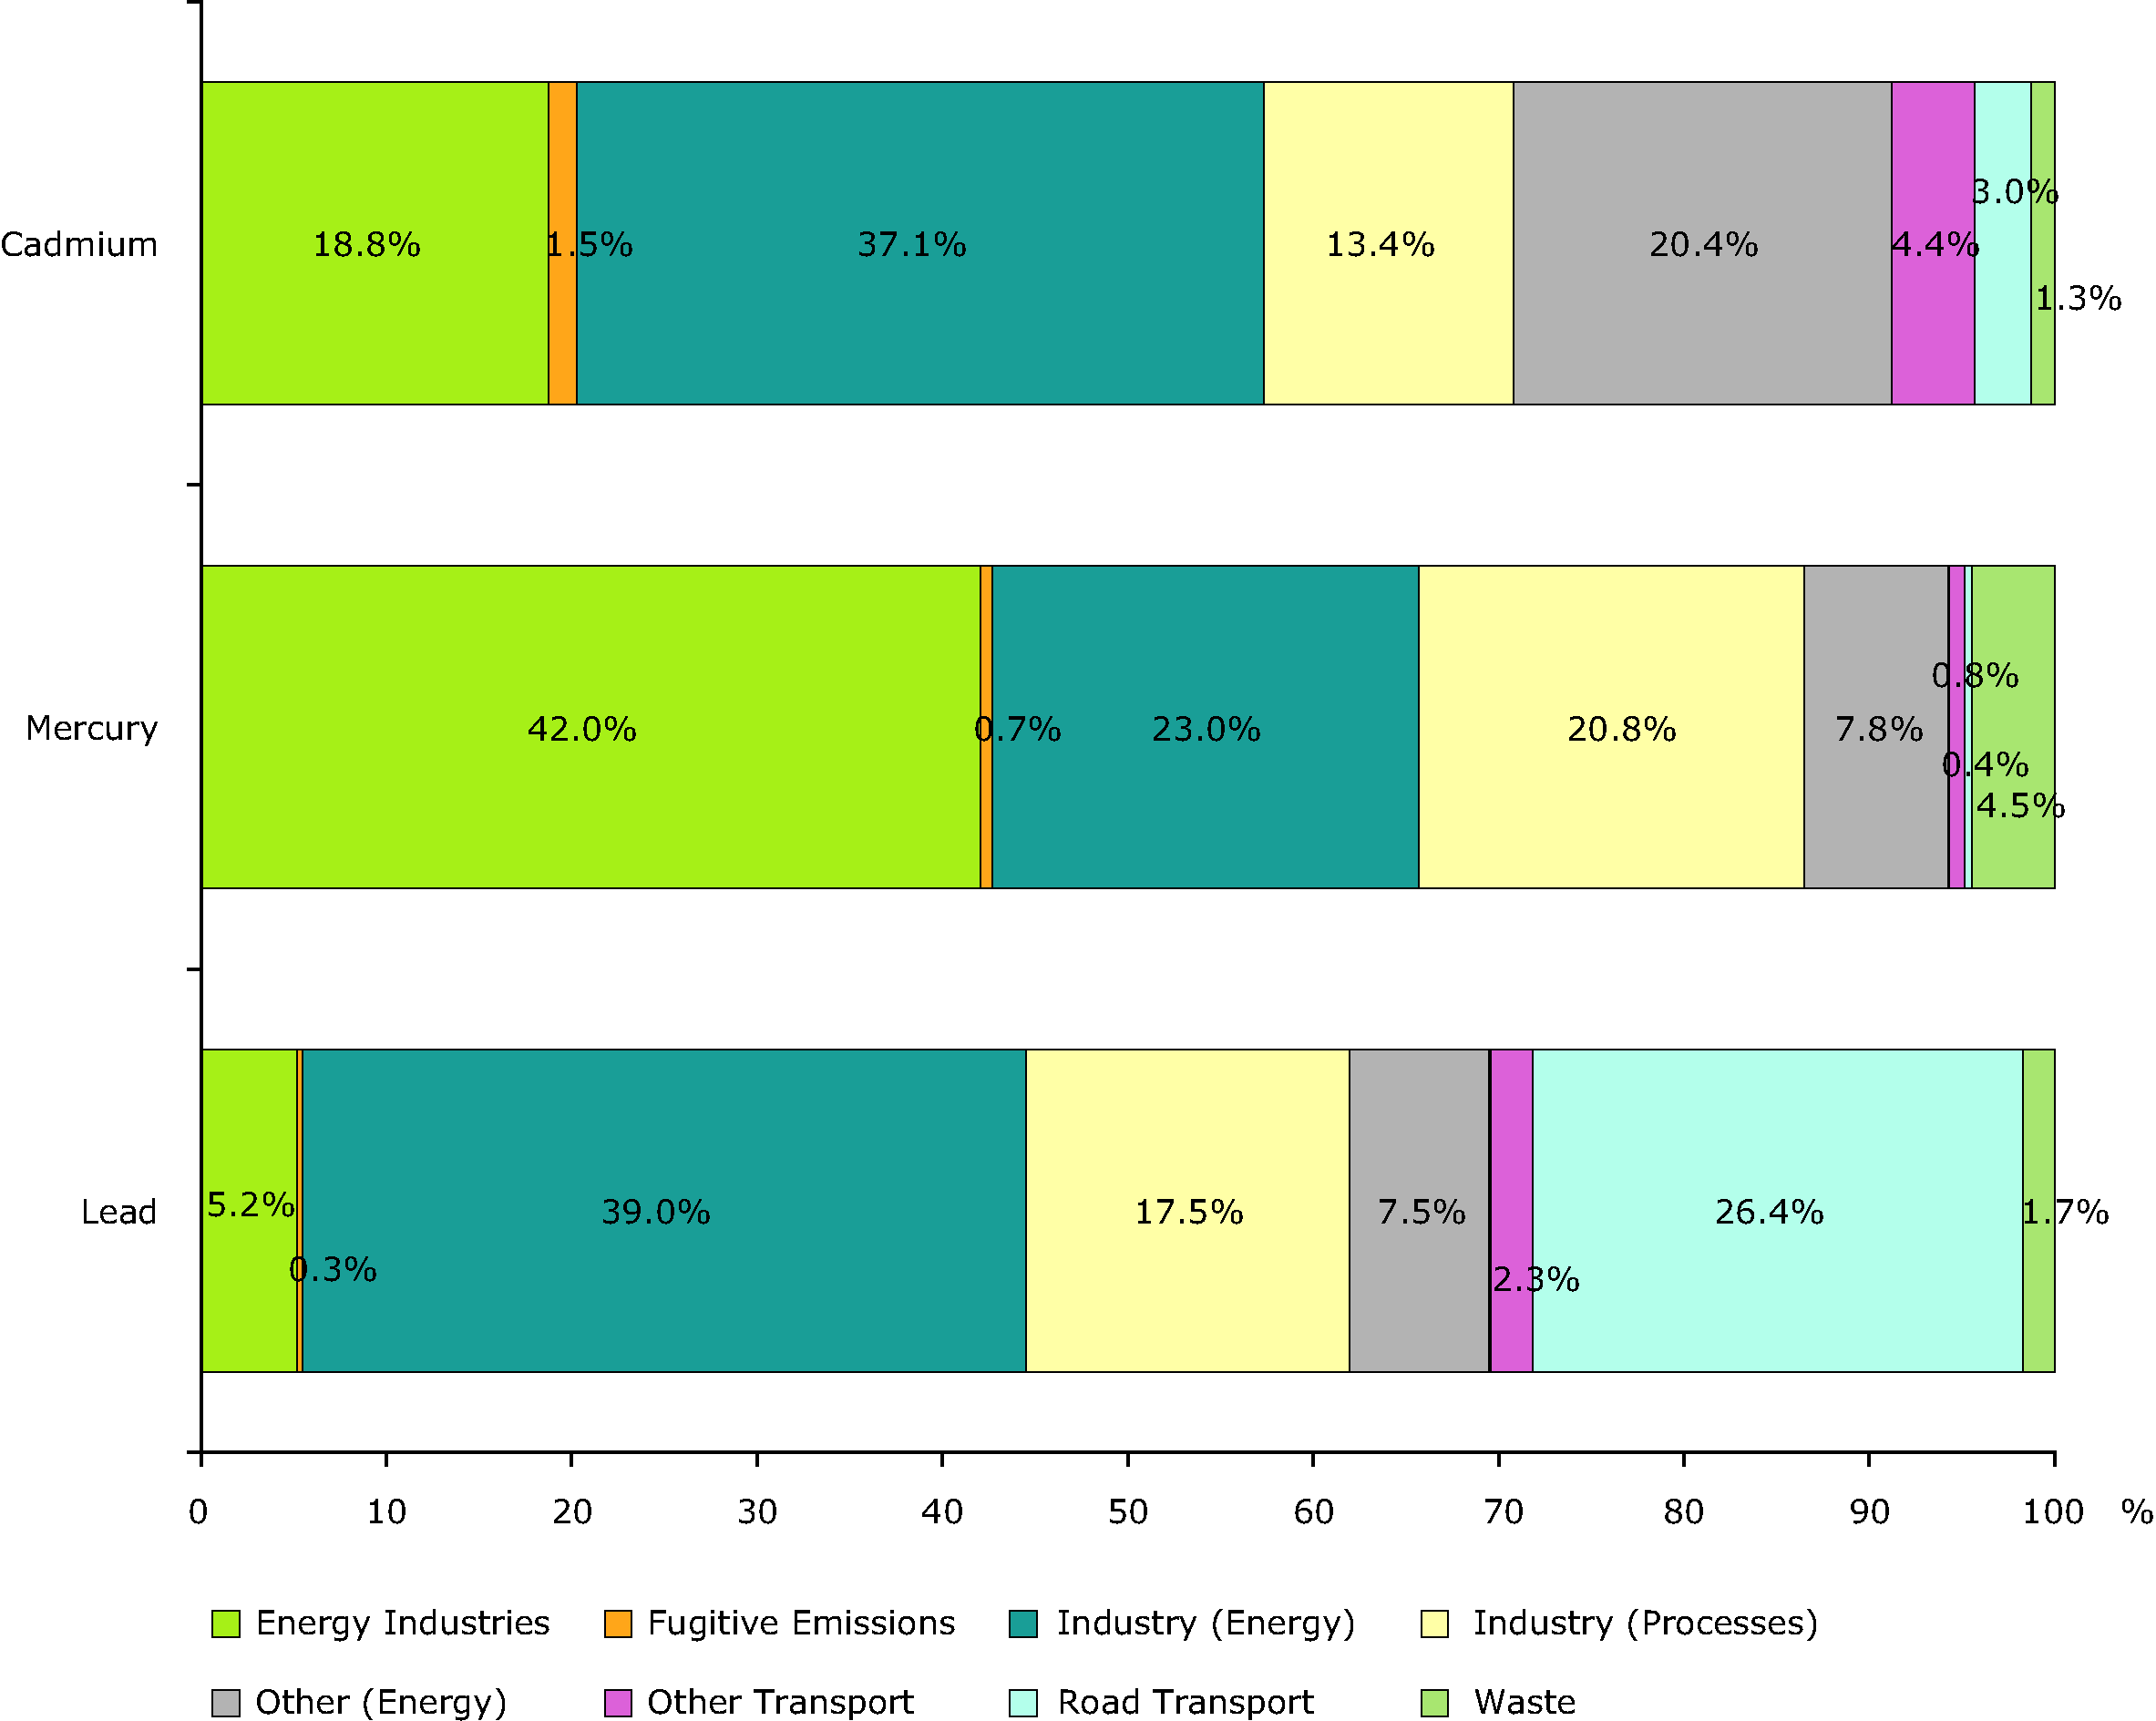 Sector split of emissions of selected heavy metals (EEA member countries)